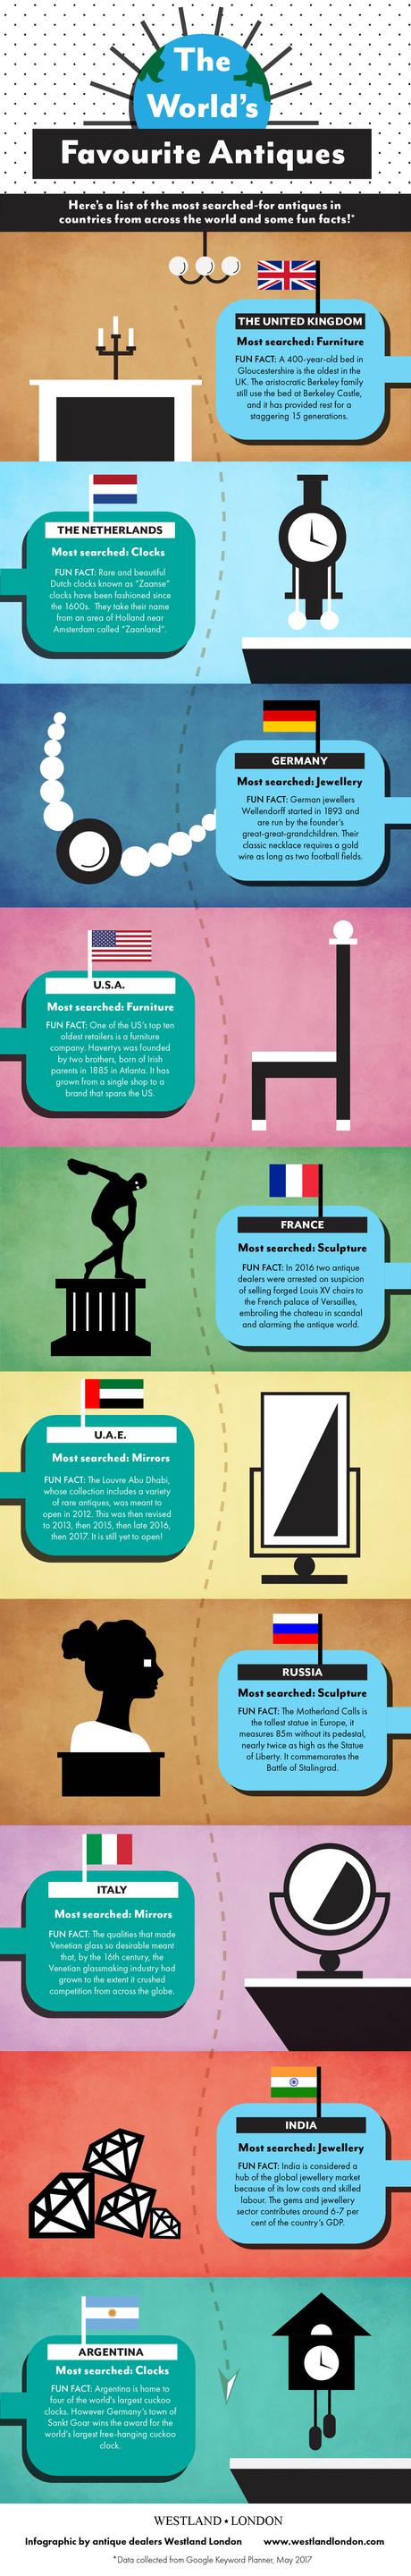 The World’s Favourite Antiques: An Infographic